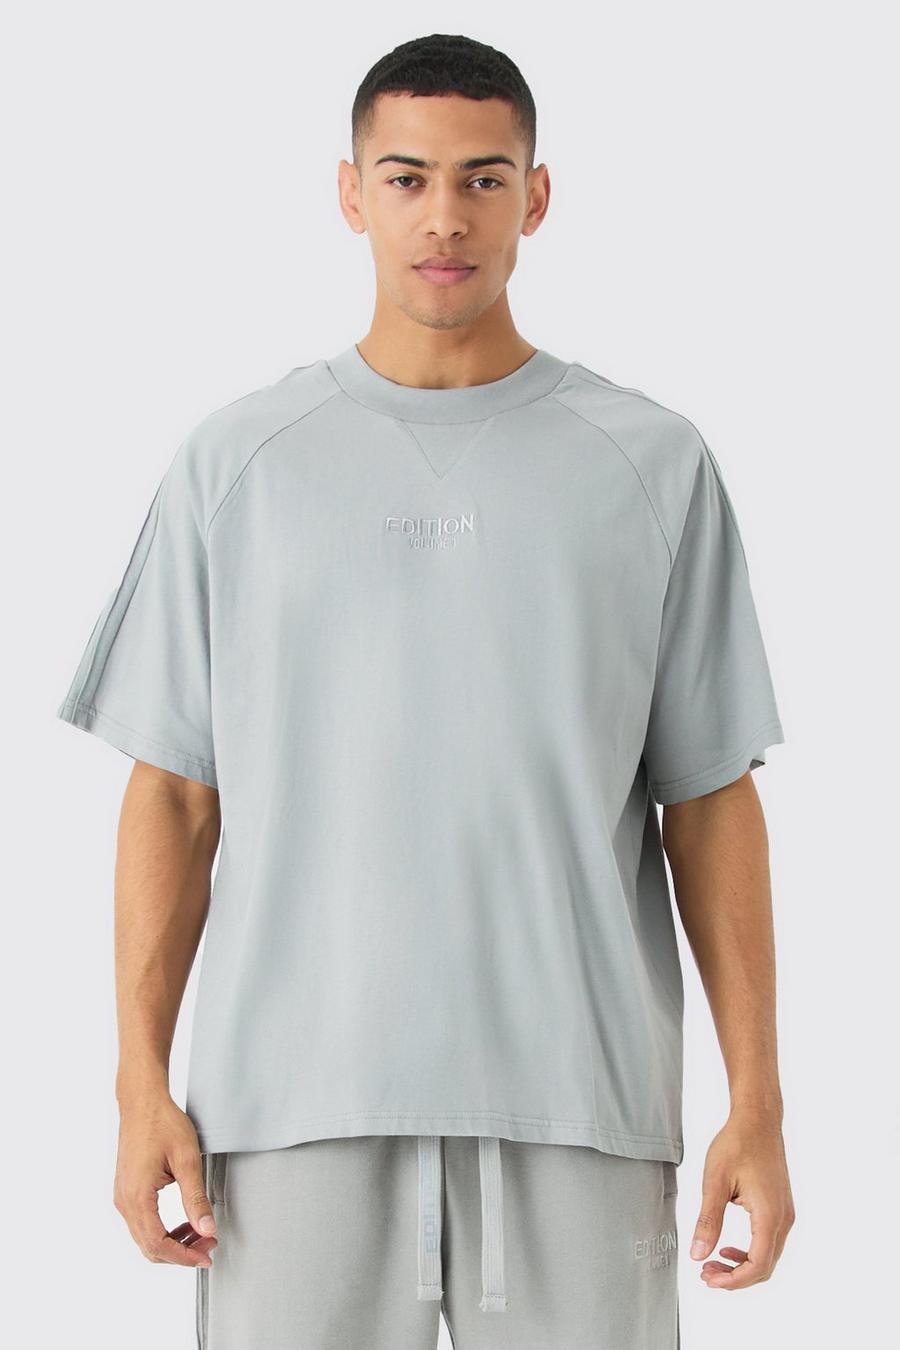 Grey EDITION Oversized Heavyweight Pin Tuck T-shirt image number 1